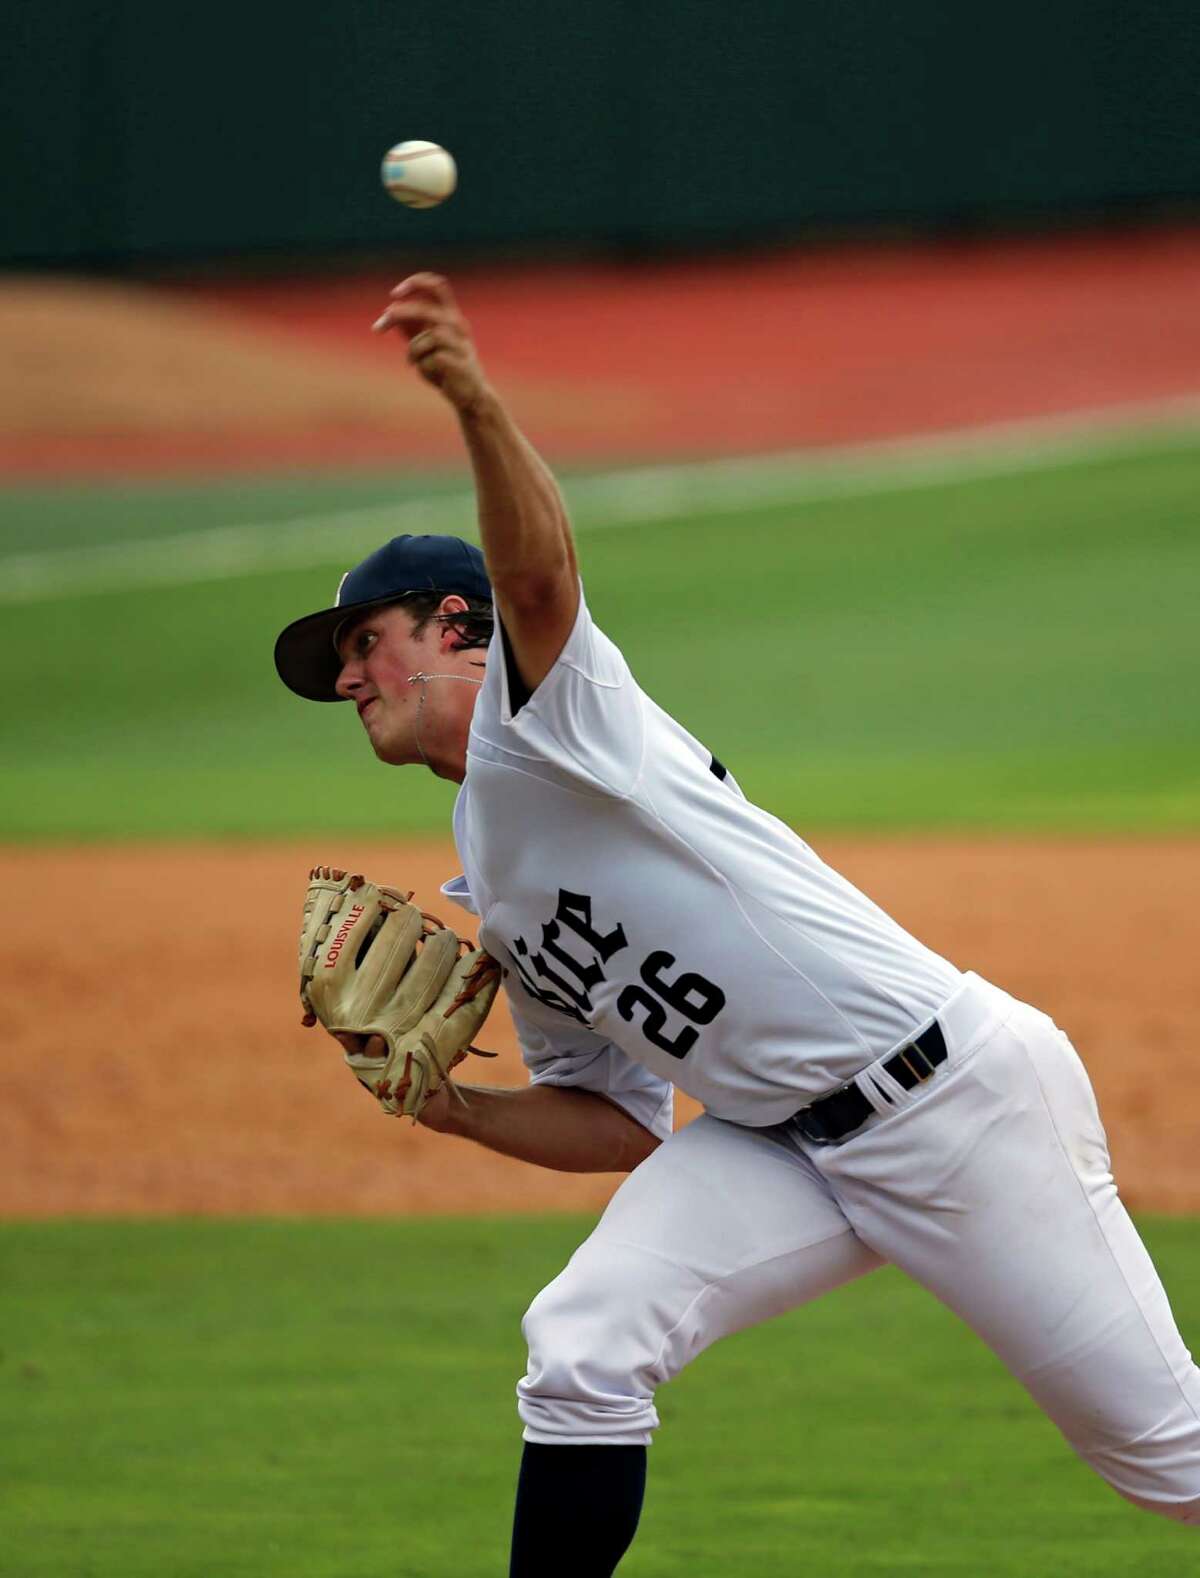 Rice's Blake Fox pitches in the fourth inning of an NCAA college regional baseball game against the Southeastern Louisiana in Baton Rouge, La., Saturday, June 4, 2016. (AP Photo/Gerald Herbert)